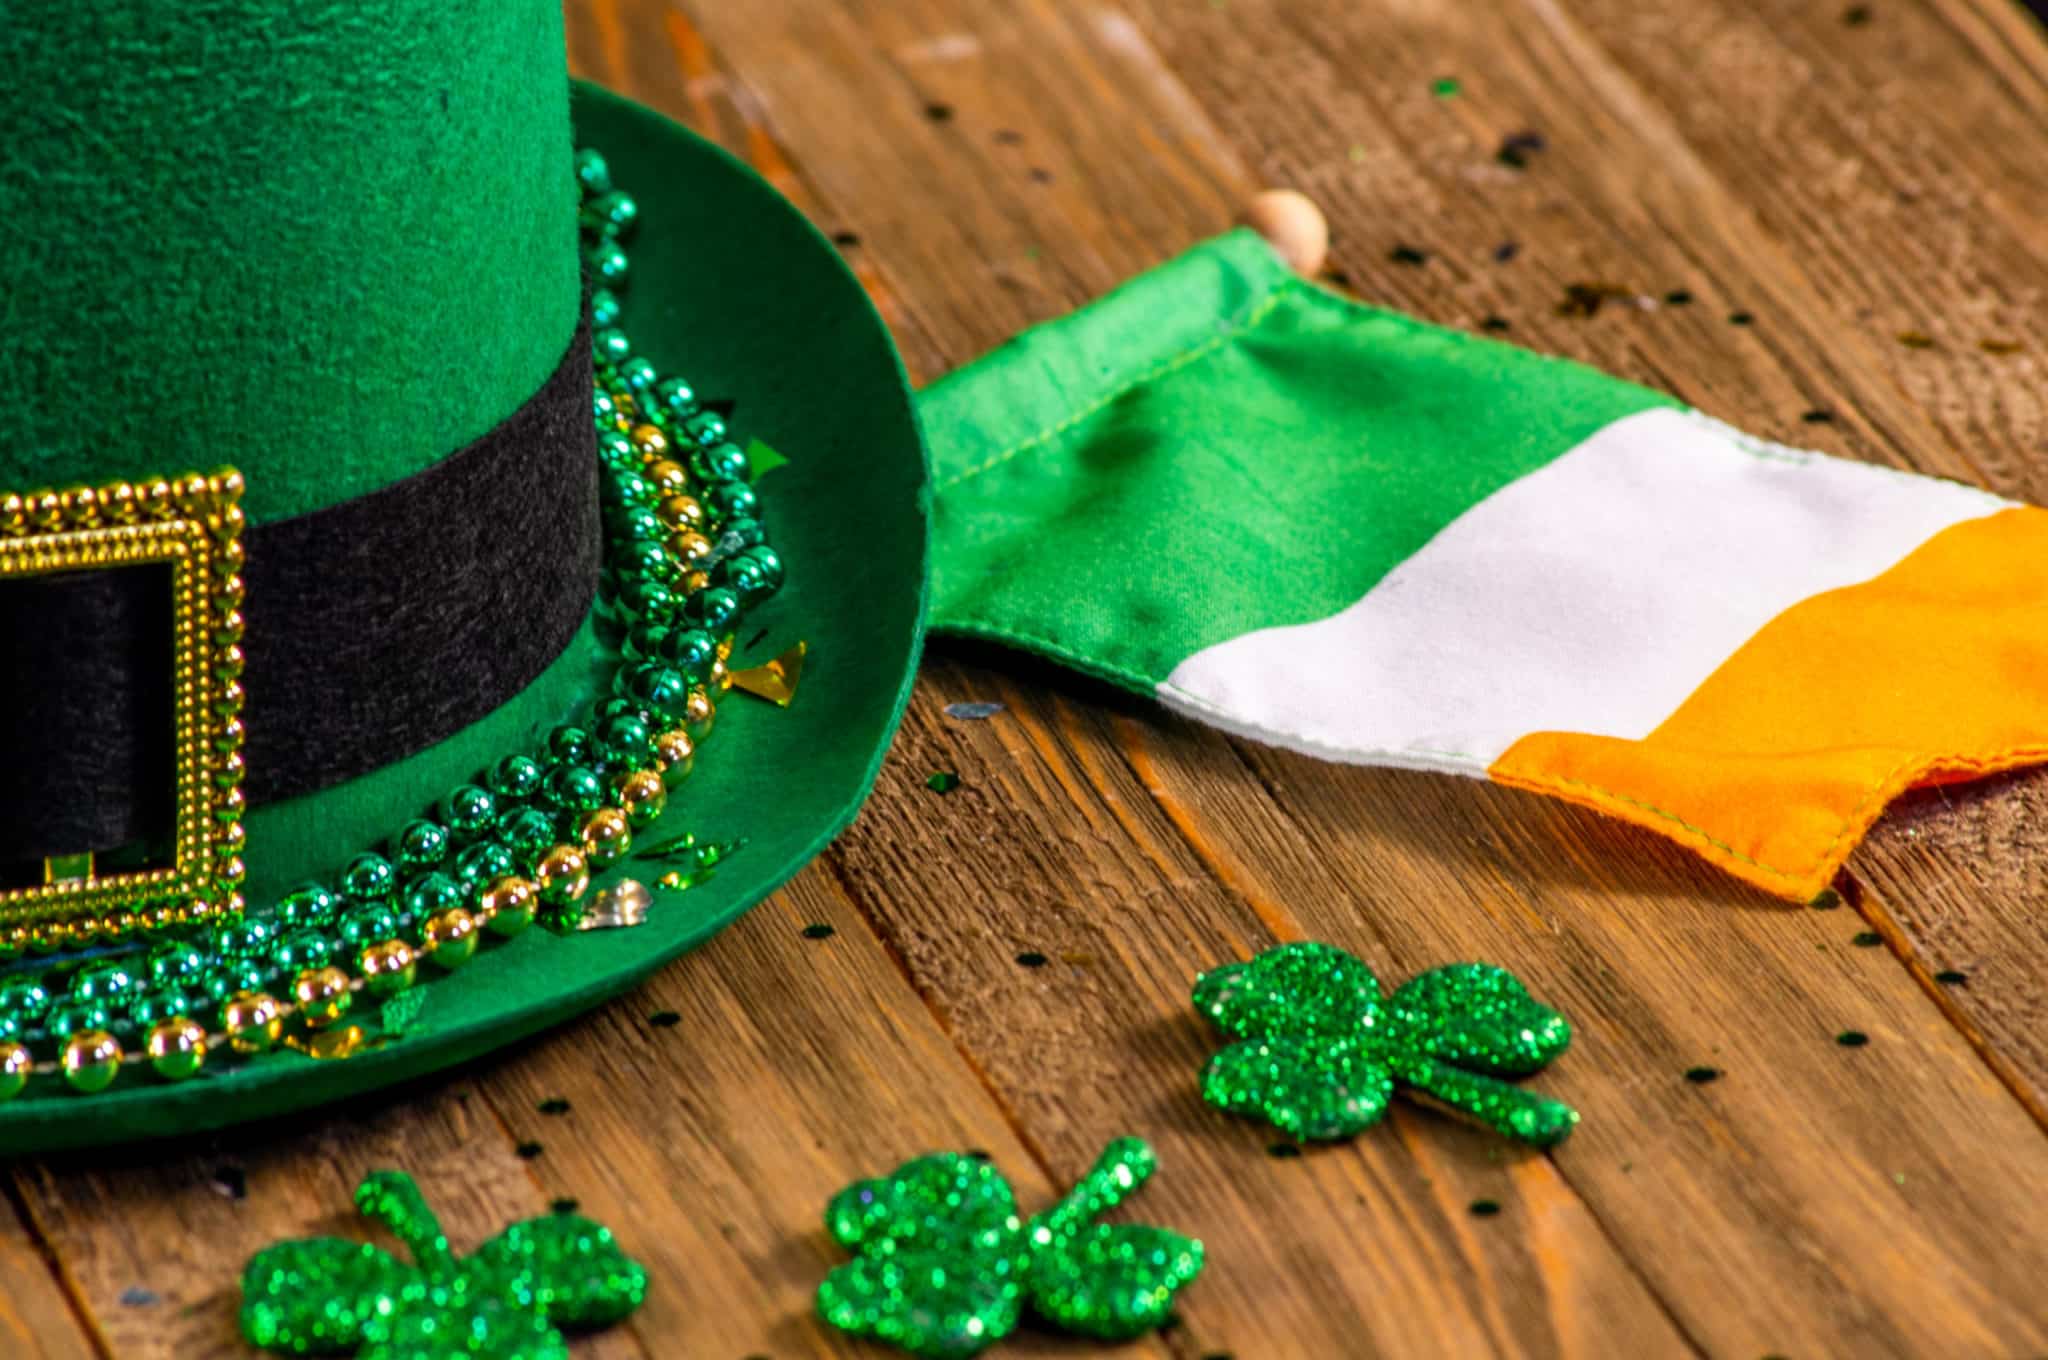 St. Patrick's Day Themed Items such as A Green Hat, Irish Flag and Glittery Shamrocks